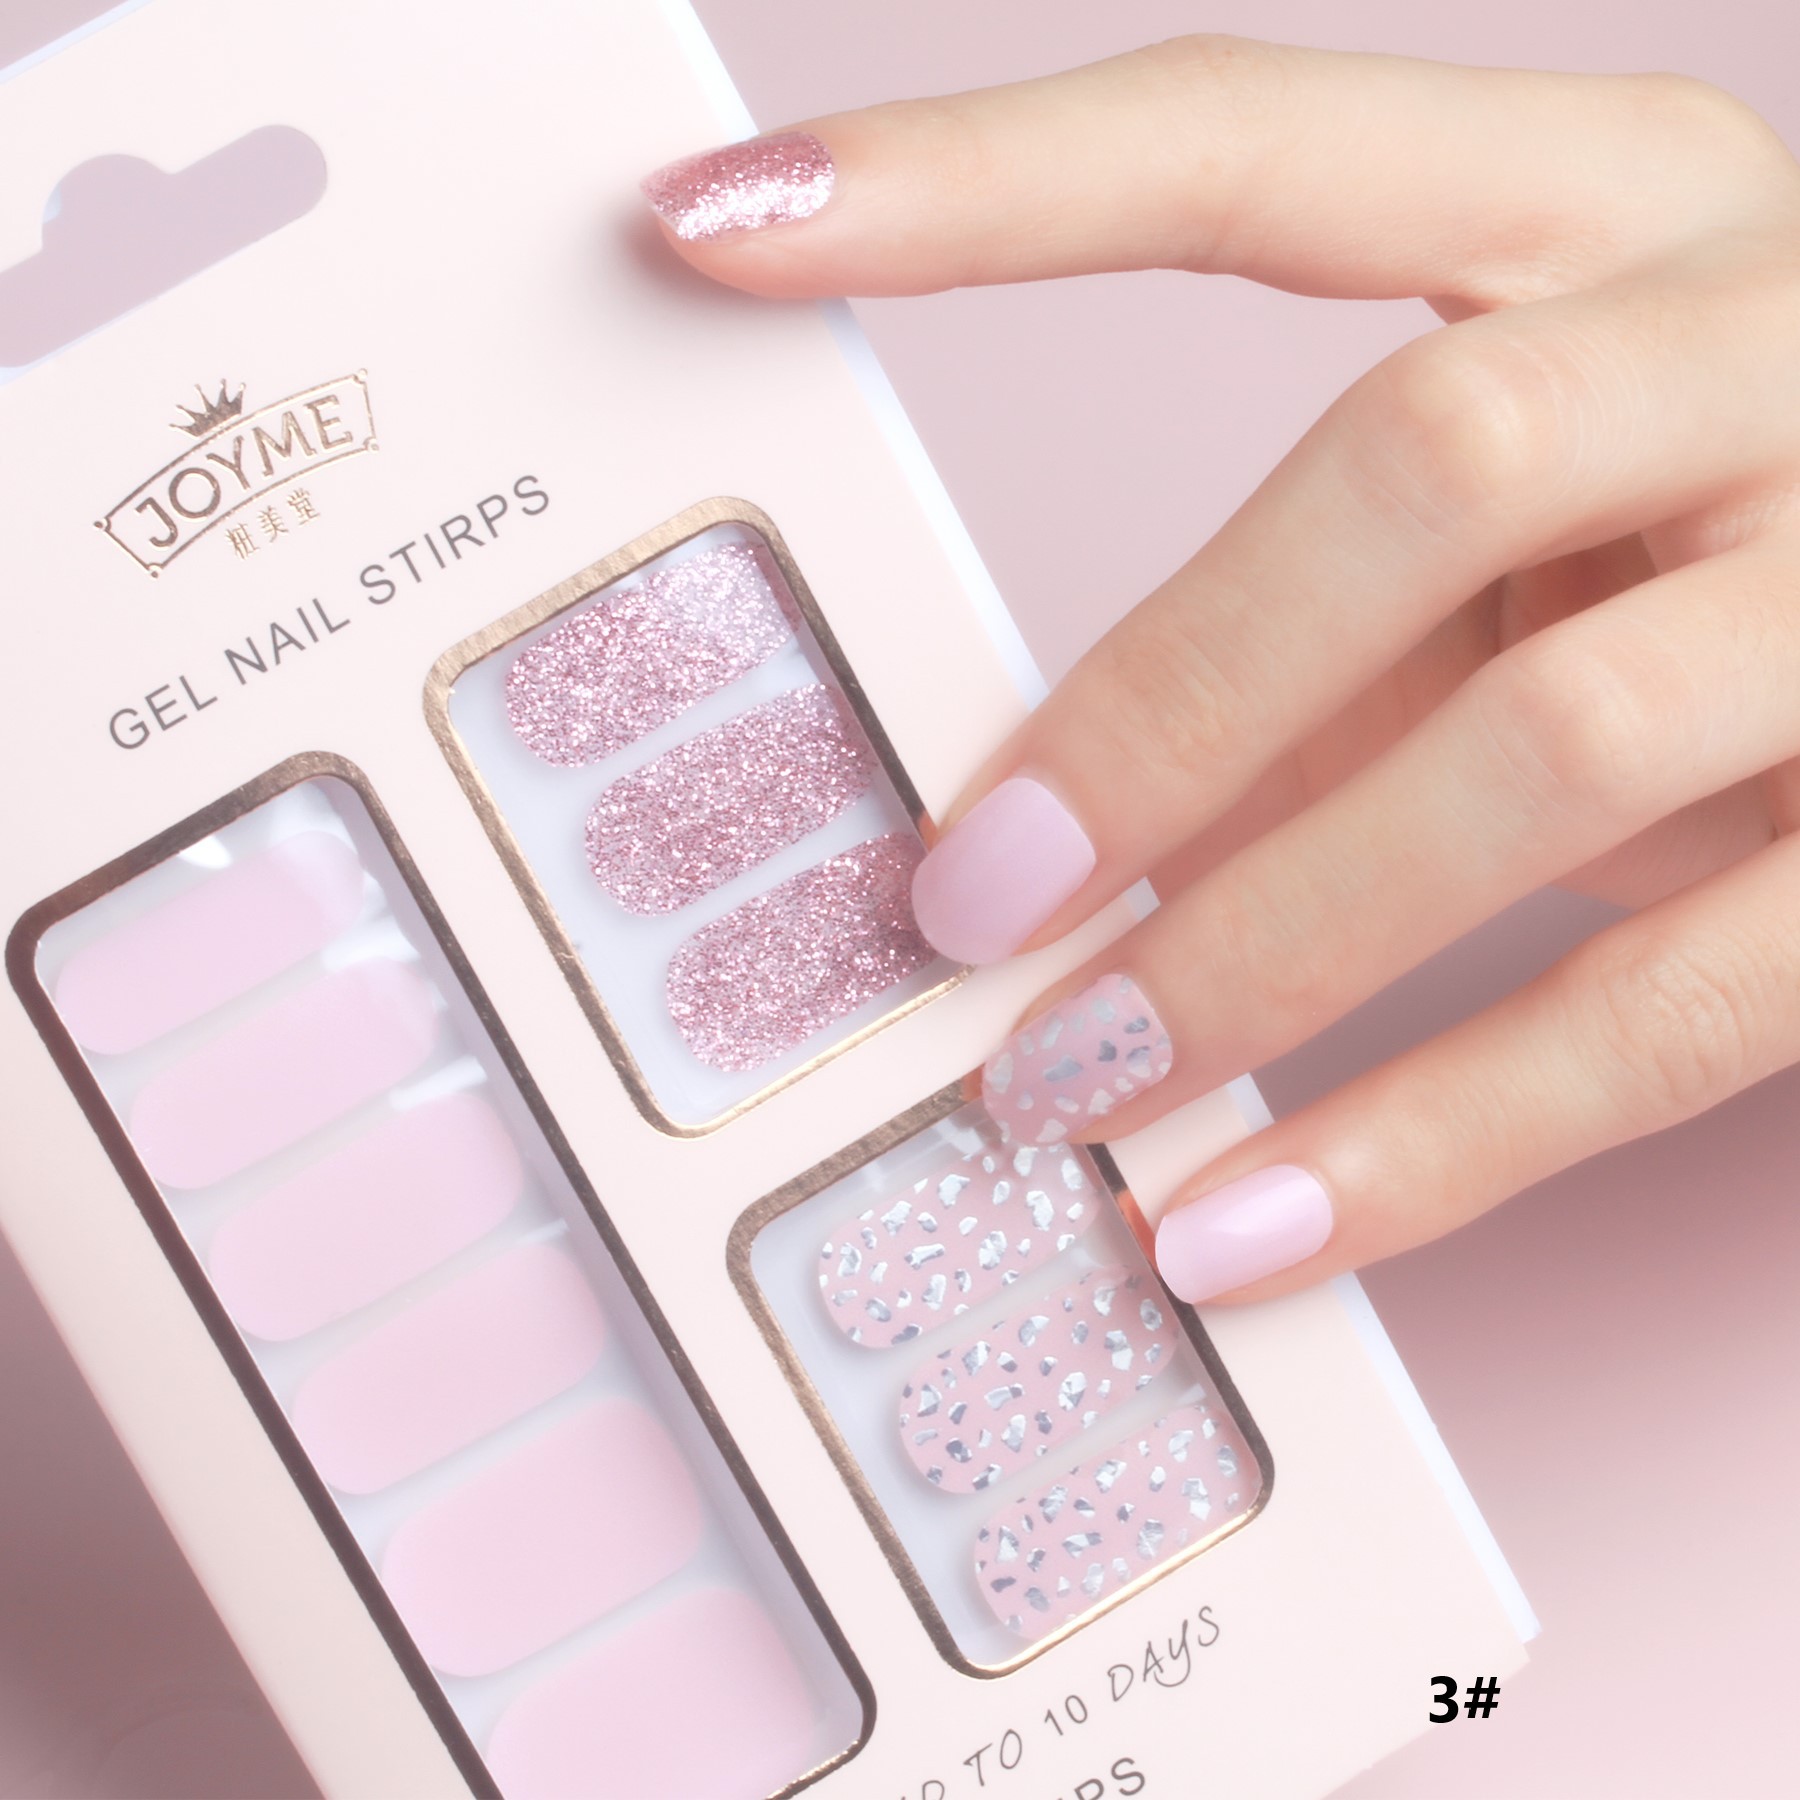 Internet Celebrity Same Style Nail Stickers Waterproof Nails Stickers Baking-Free 12 Stickers Boxed